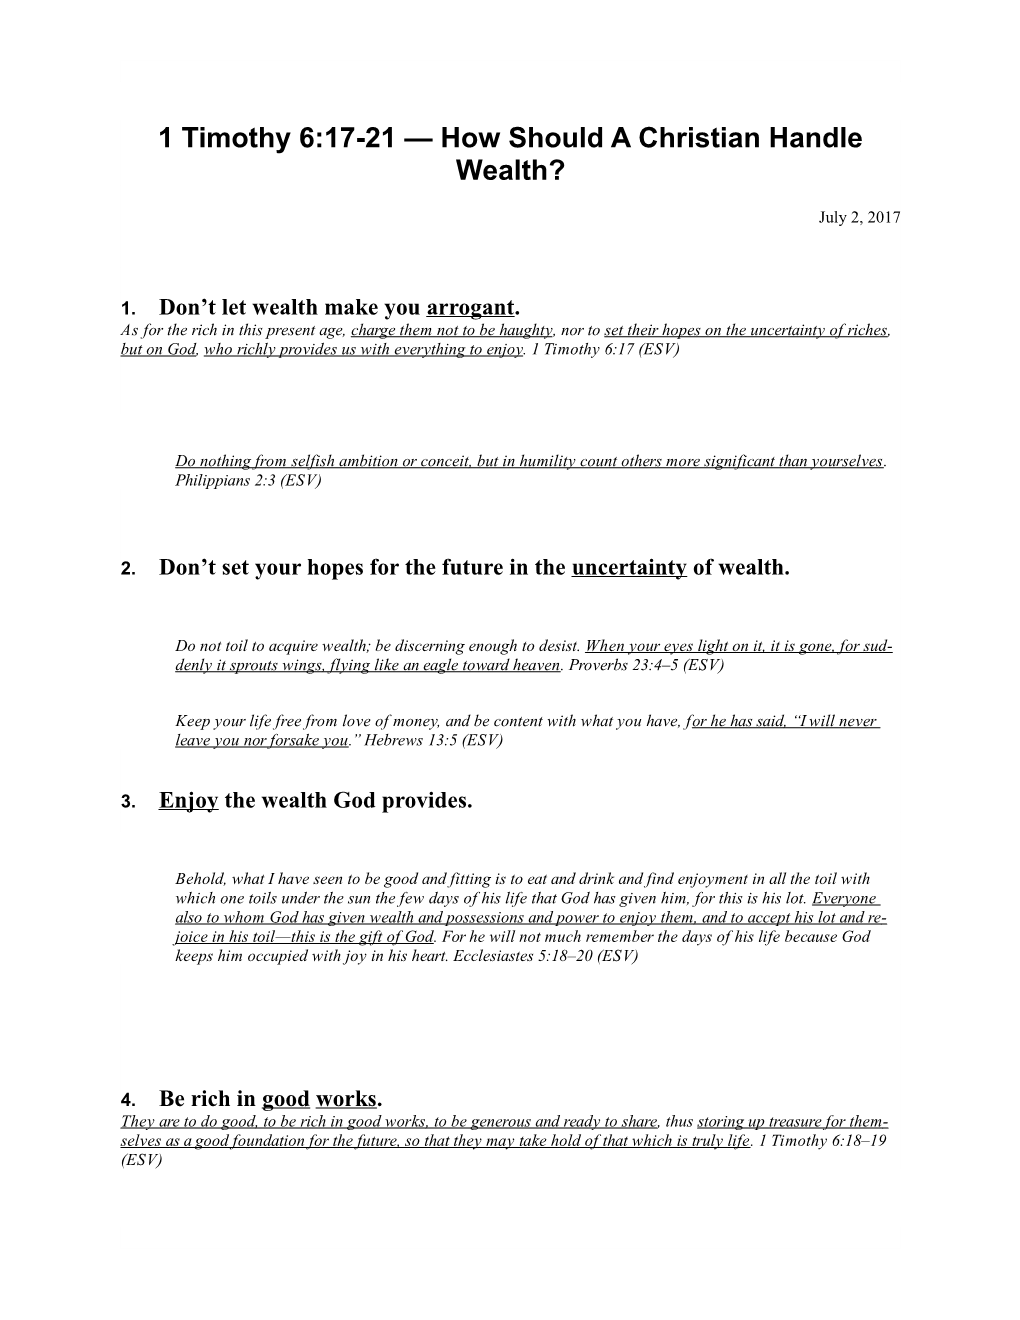 1 Timothy 6:17-21 How Should a Christian Handle Wealth?